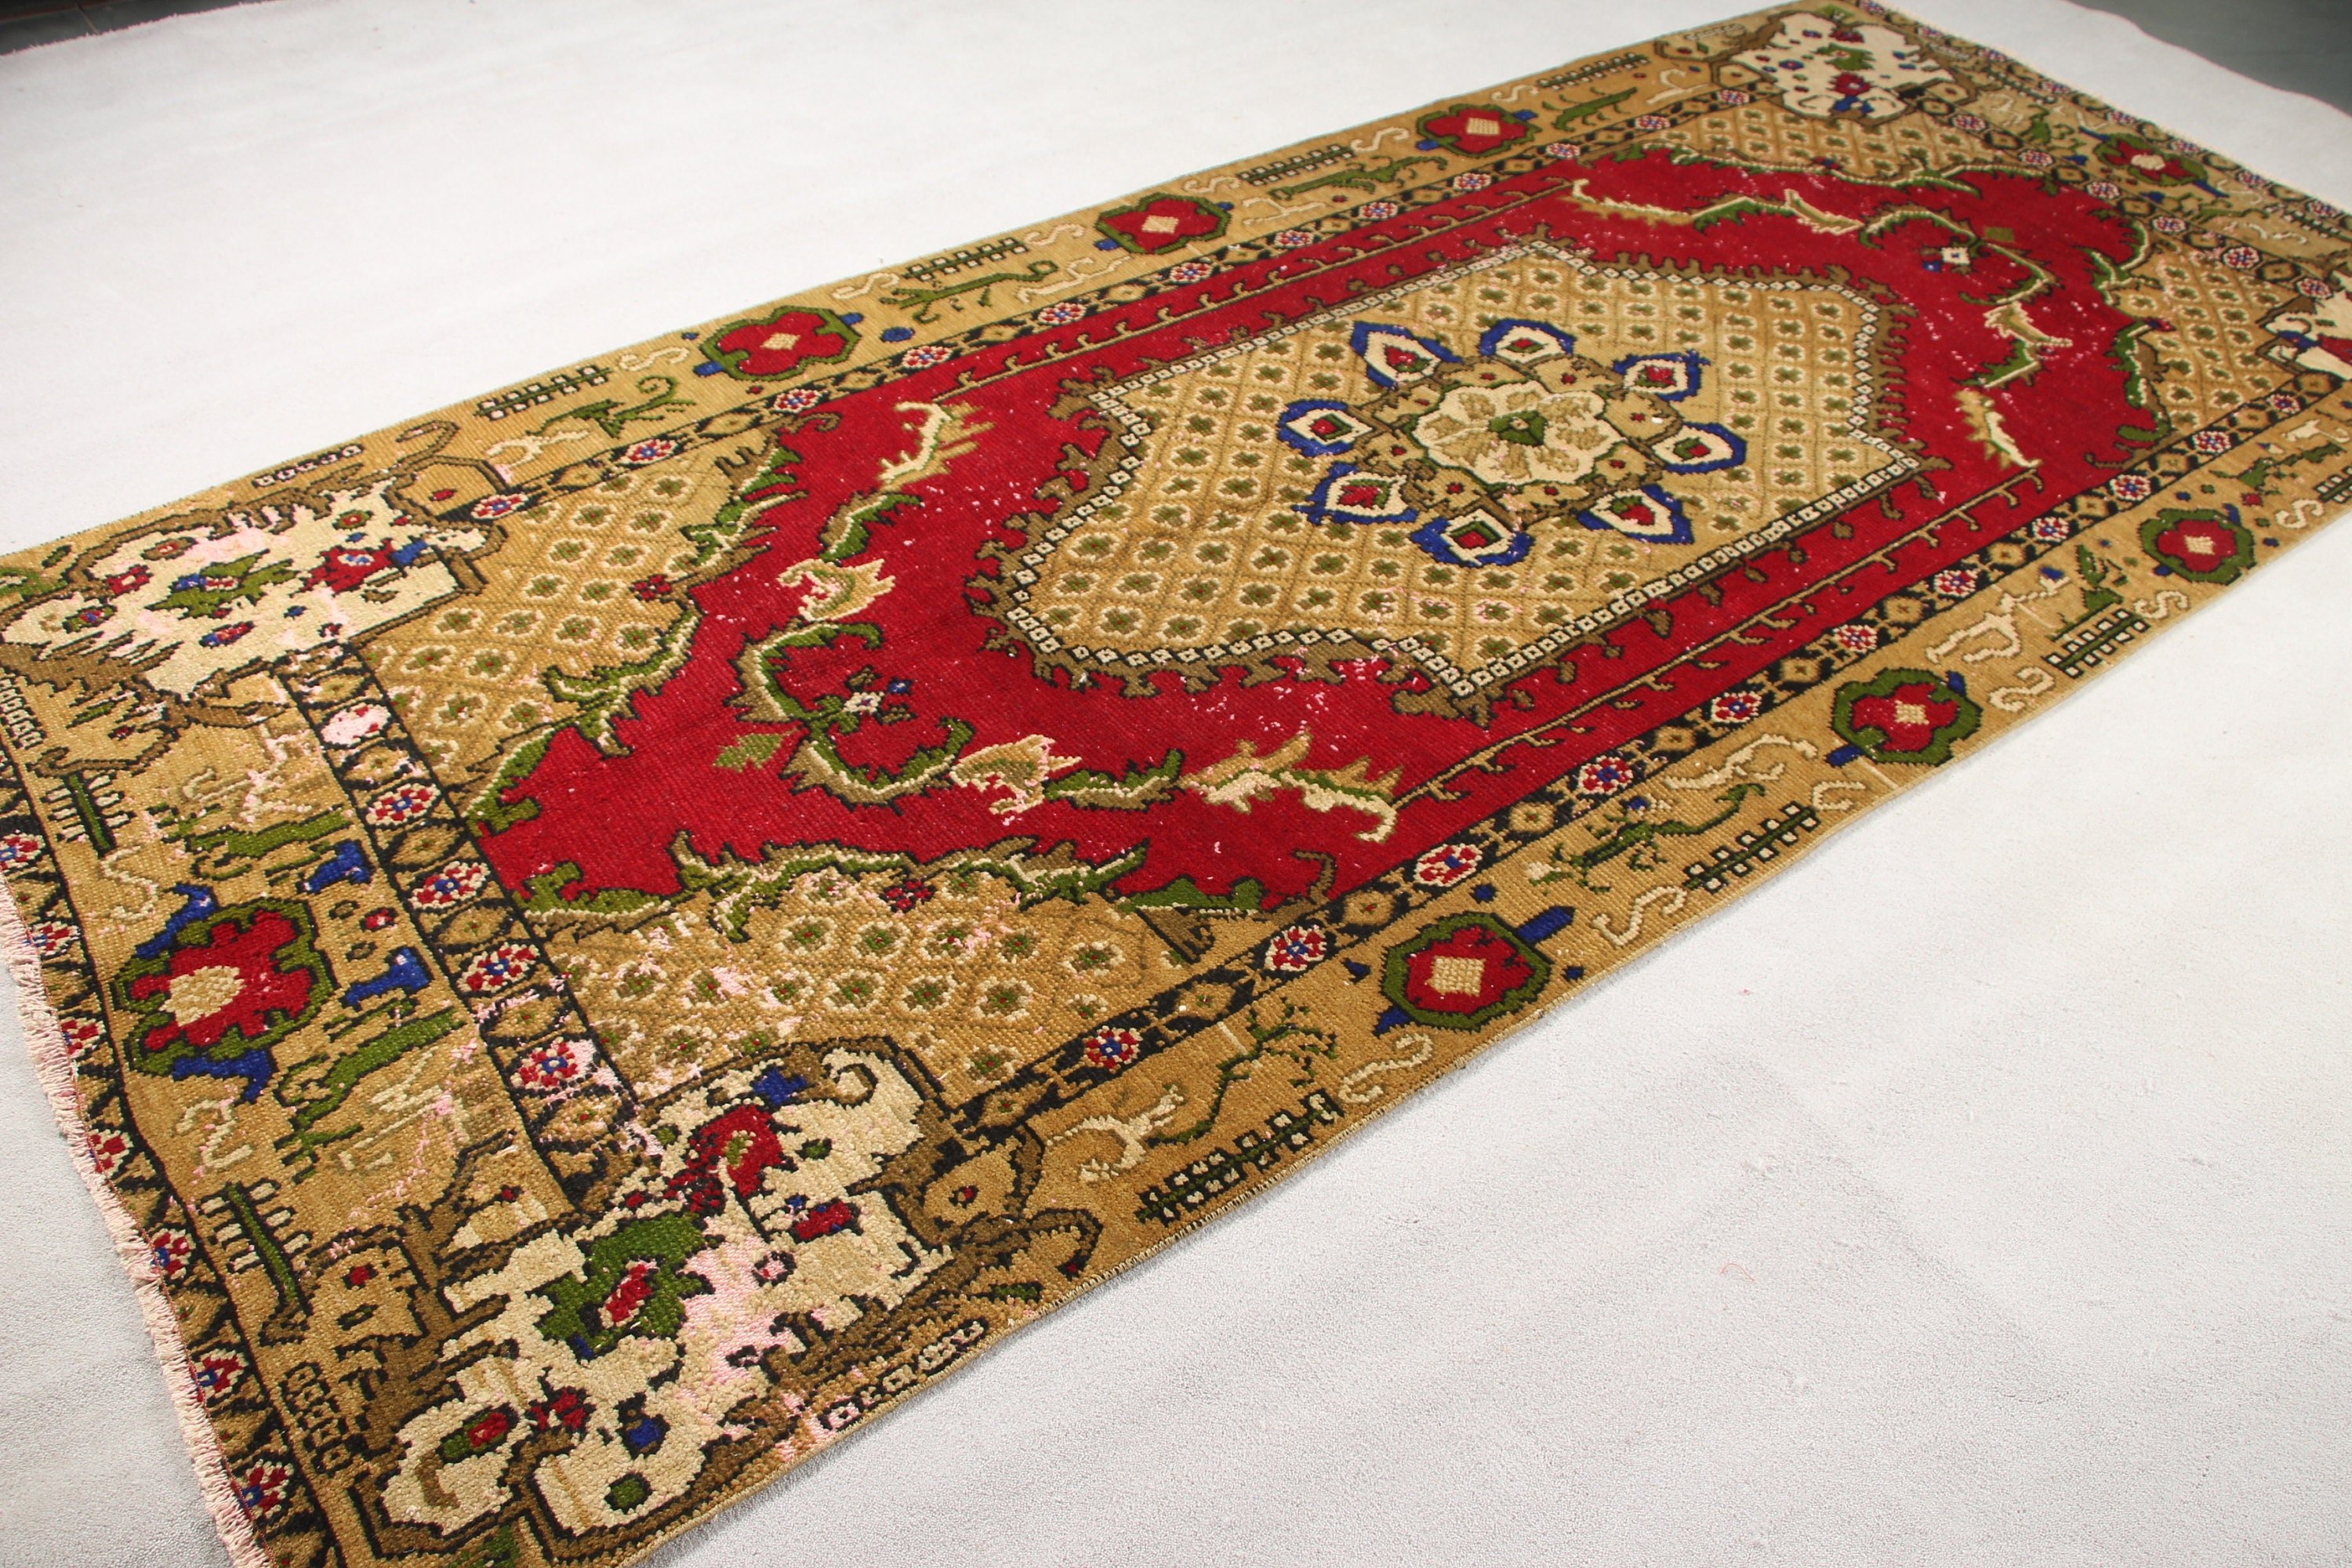 4.6x10.5 ft Large Rug, Turkey Rugs, Salon Rug, Dining Room Rugs, Vintage Rug, Red Home Decor Rugs, Turkish Rugs, Antique Rug, Moroccan Rugs